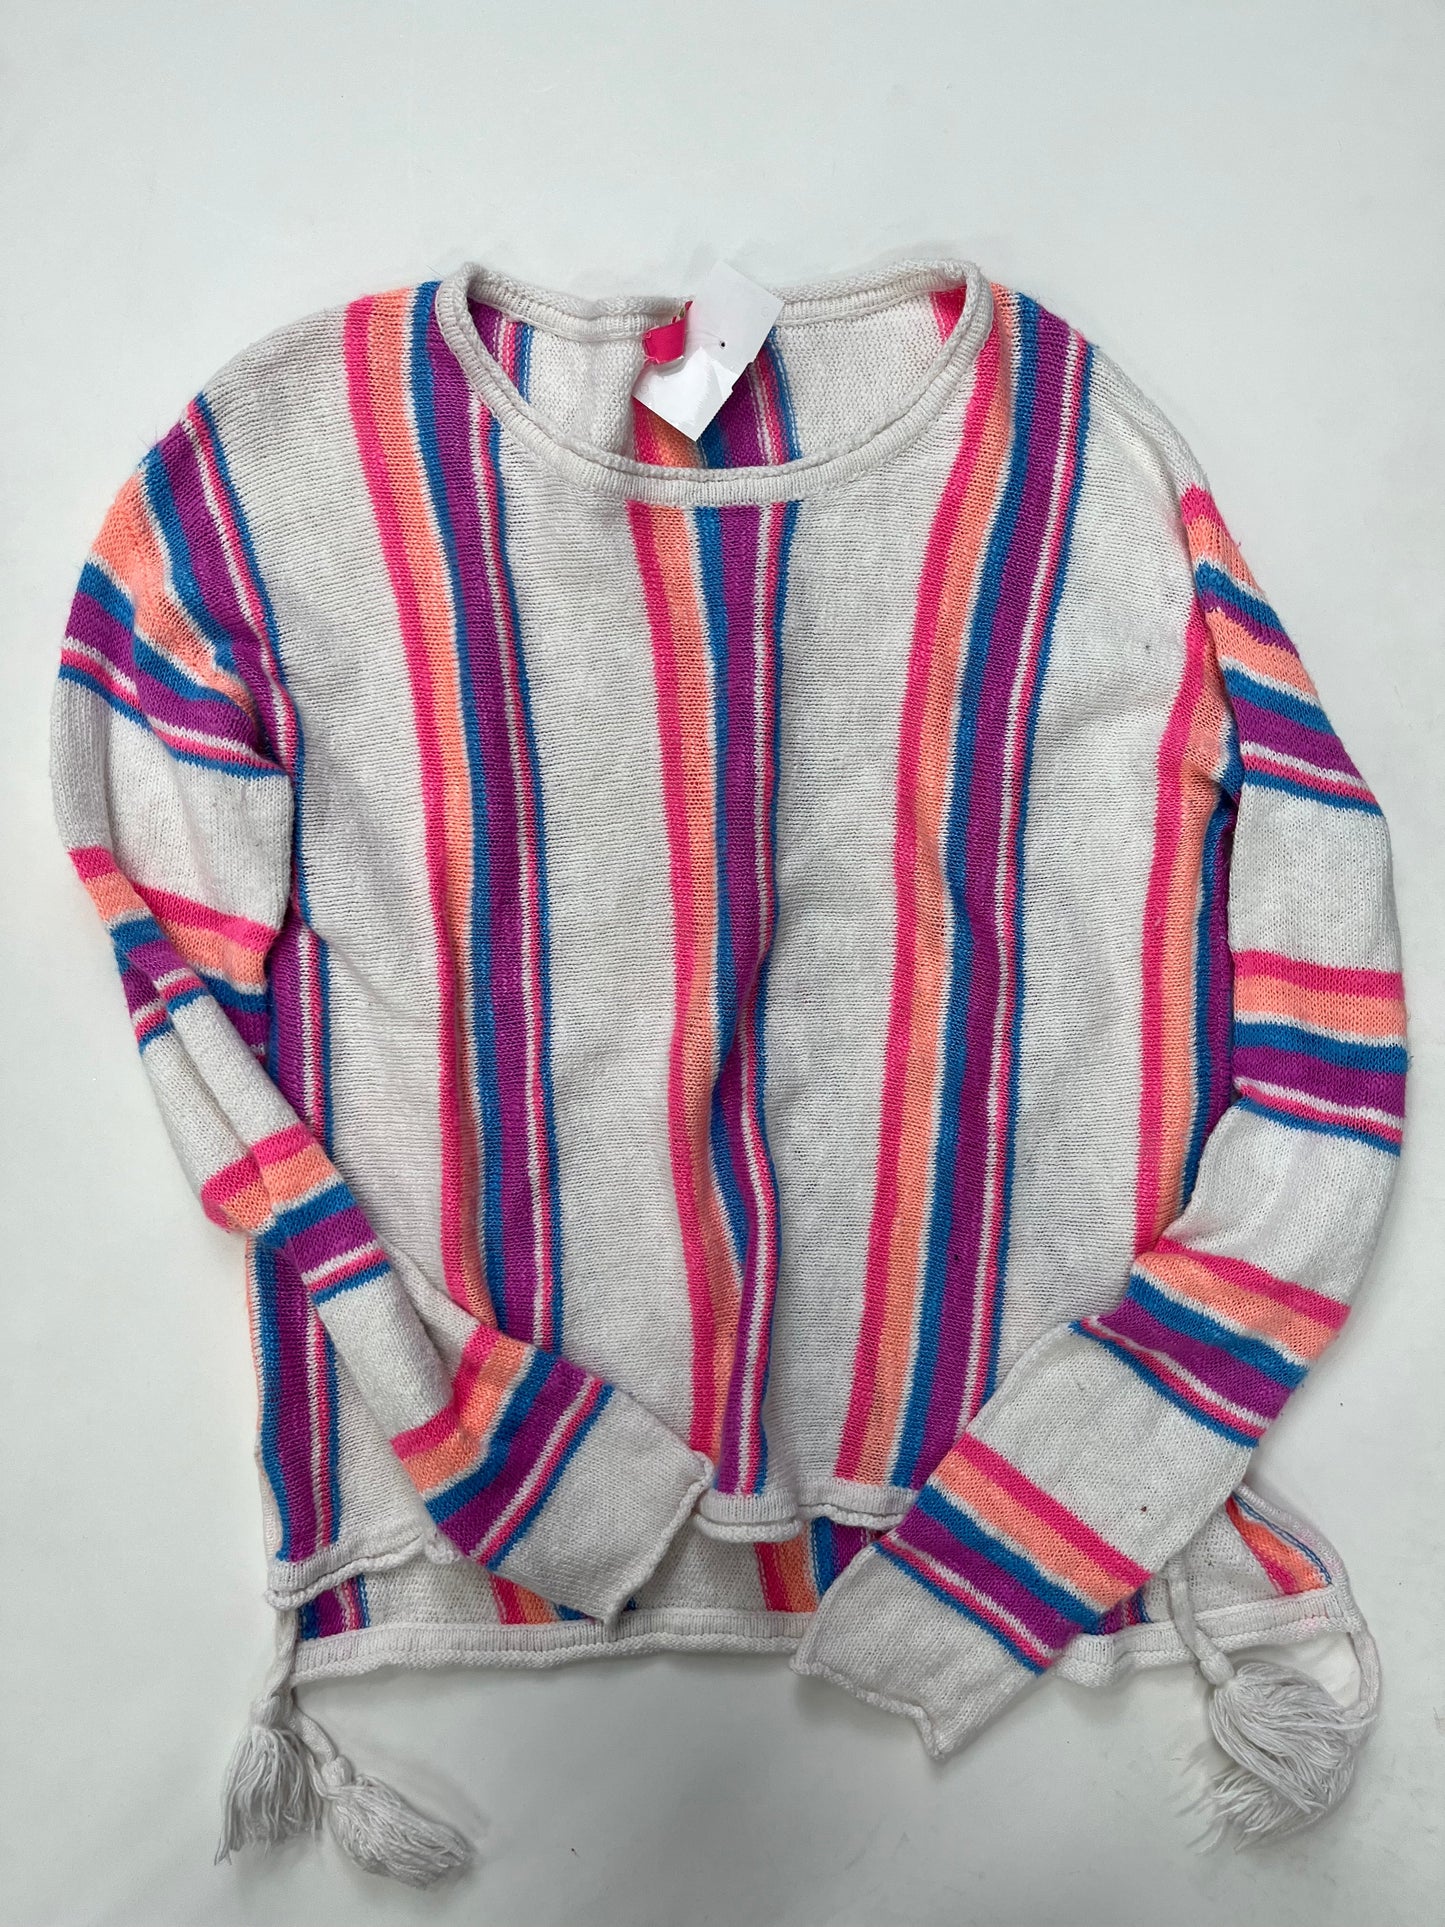 Striped Sweater Lilly Pulitzer, Size S